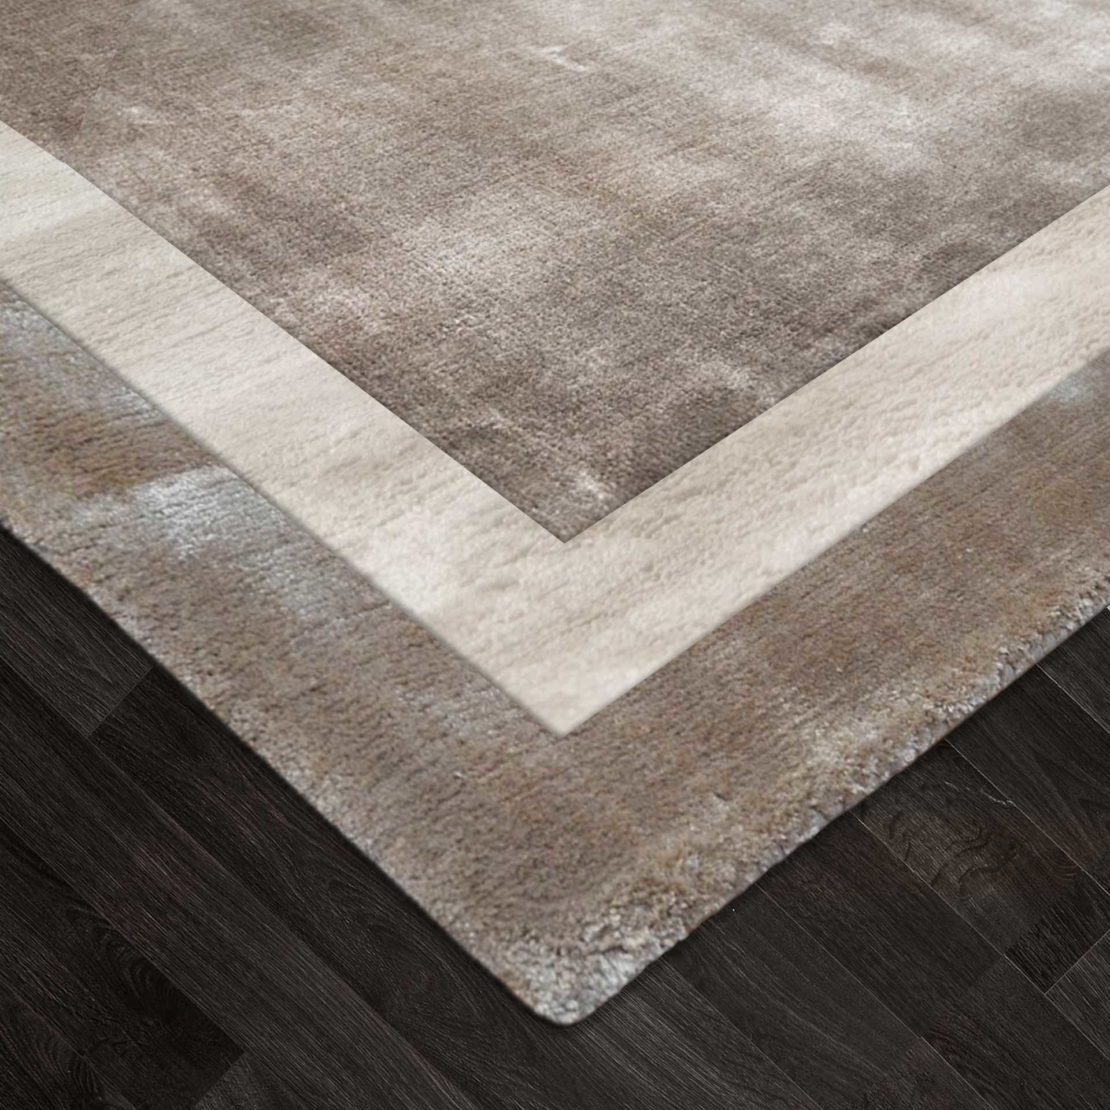 Cozy Floor Seating, Hand Woven Two-Tone High Quality Rug